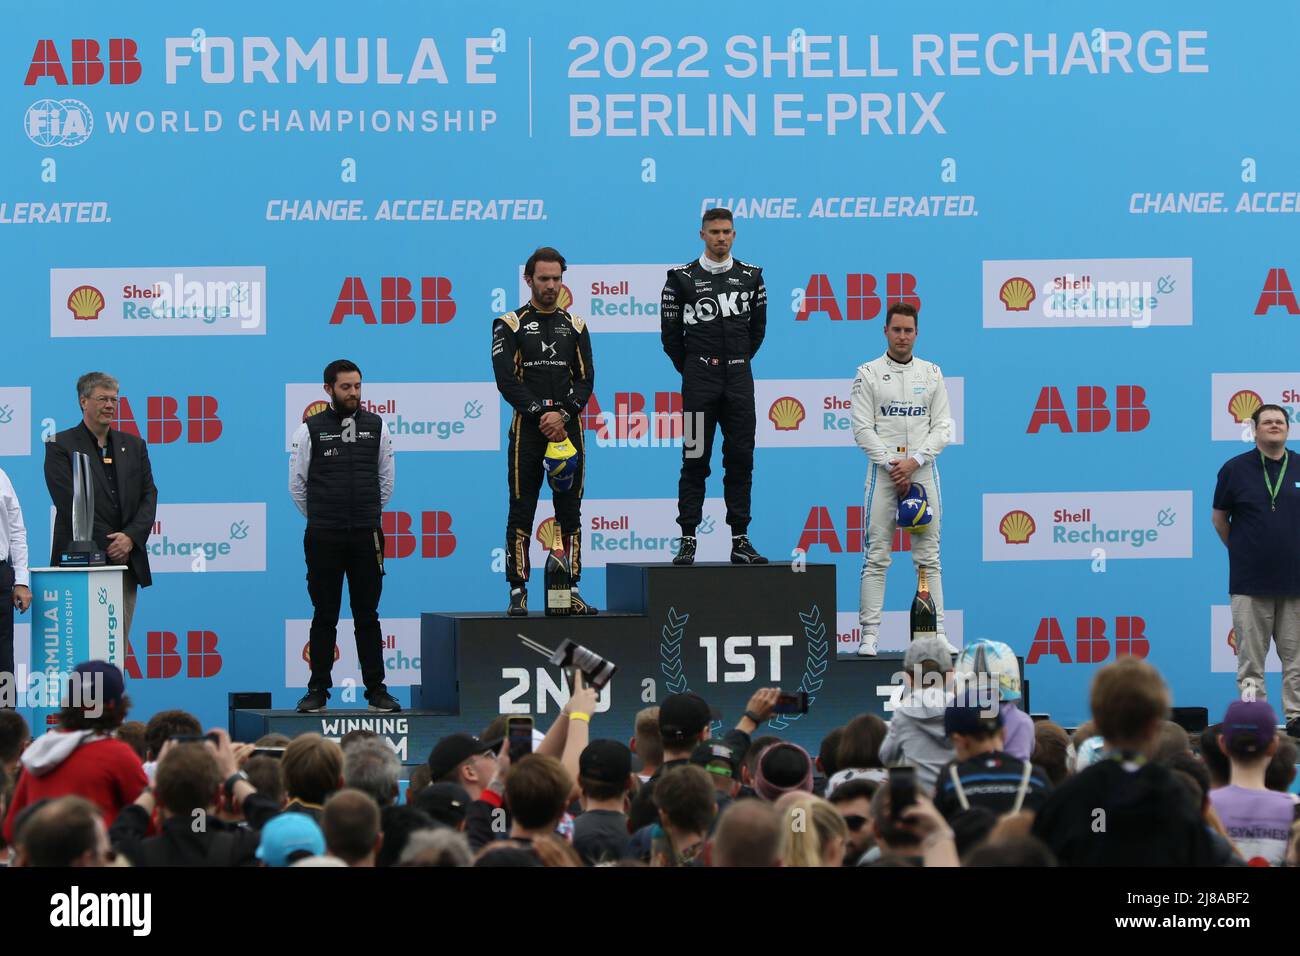 Germany, Berlin, May 14, 2022. Jean-Éric Vergne, Edoardo Mortara and Stoffel Vandoorne at the award ceremony. Edoardo Mortara of Team ROKiT Venturi Racing wins Round 7 of the 2021/22 ABB FIA Formula E Championship. Jean-Éric Vergne of Team DS TECHEETAH wins second place and Stoffel Vandoorne of Team Mercedes-EQ wins third place. The Shell Recharge Berlin E-Prix 2022 will be in Berlin on May 14th and 15th, 2022 with a double race for the eighth time. The 2021/2022 electric racing series will take place at the former Tempelhof Airport. Stock Photo